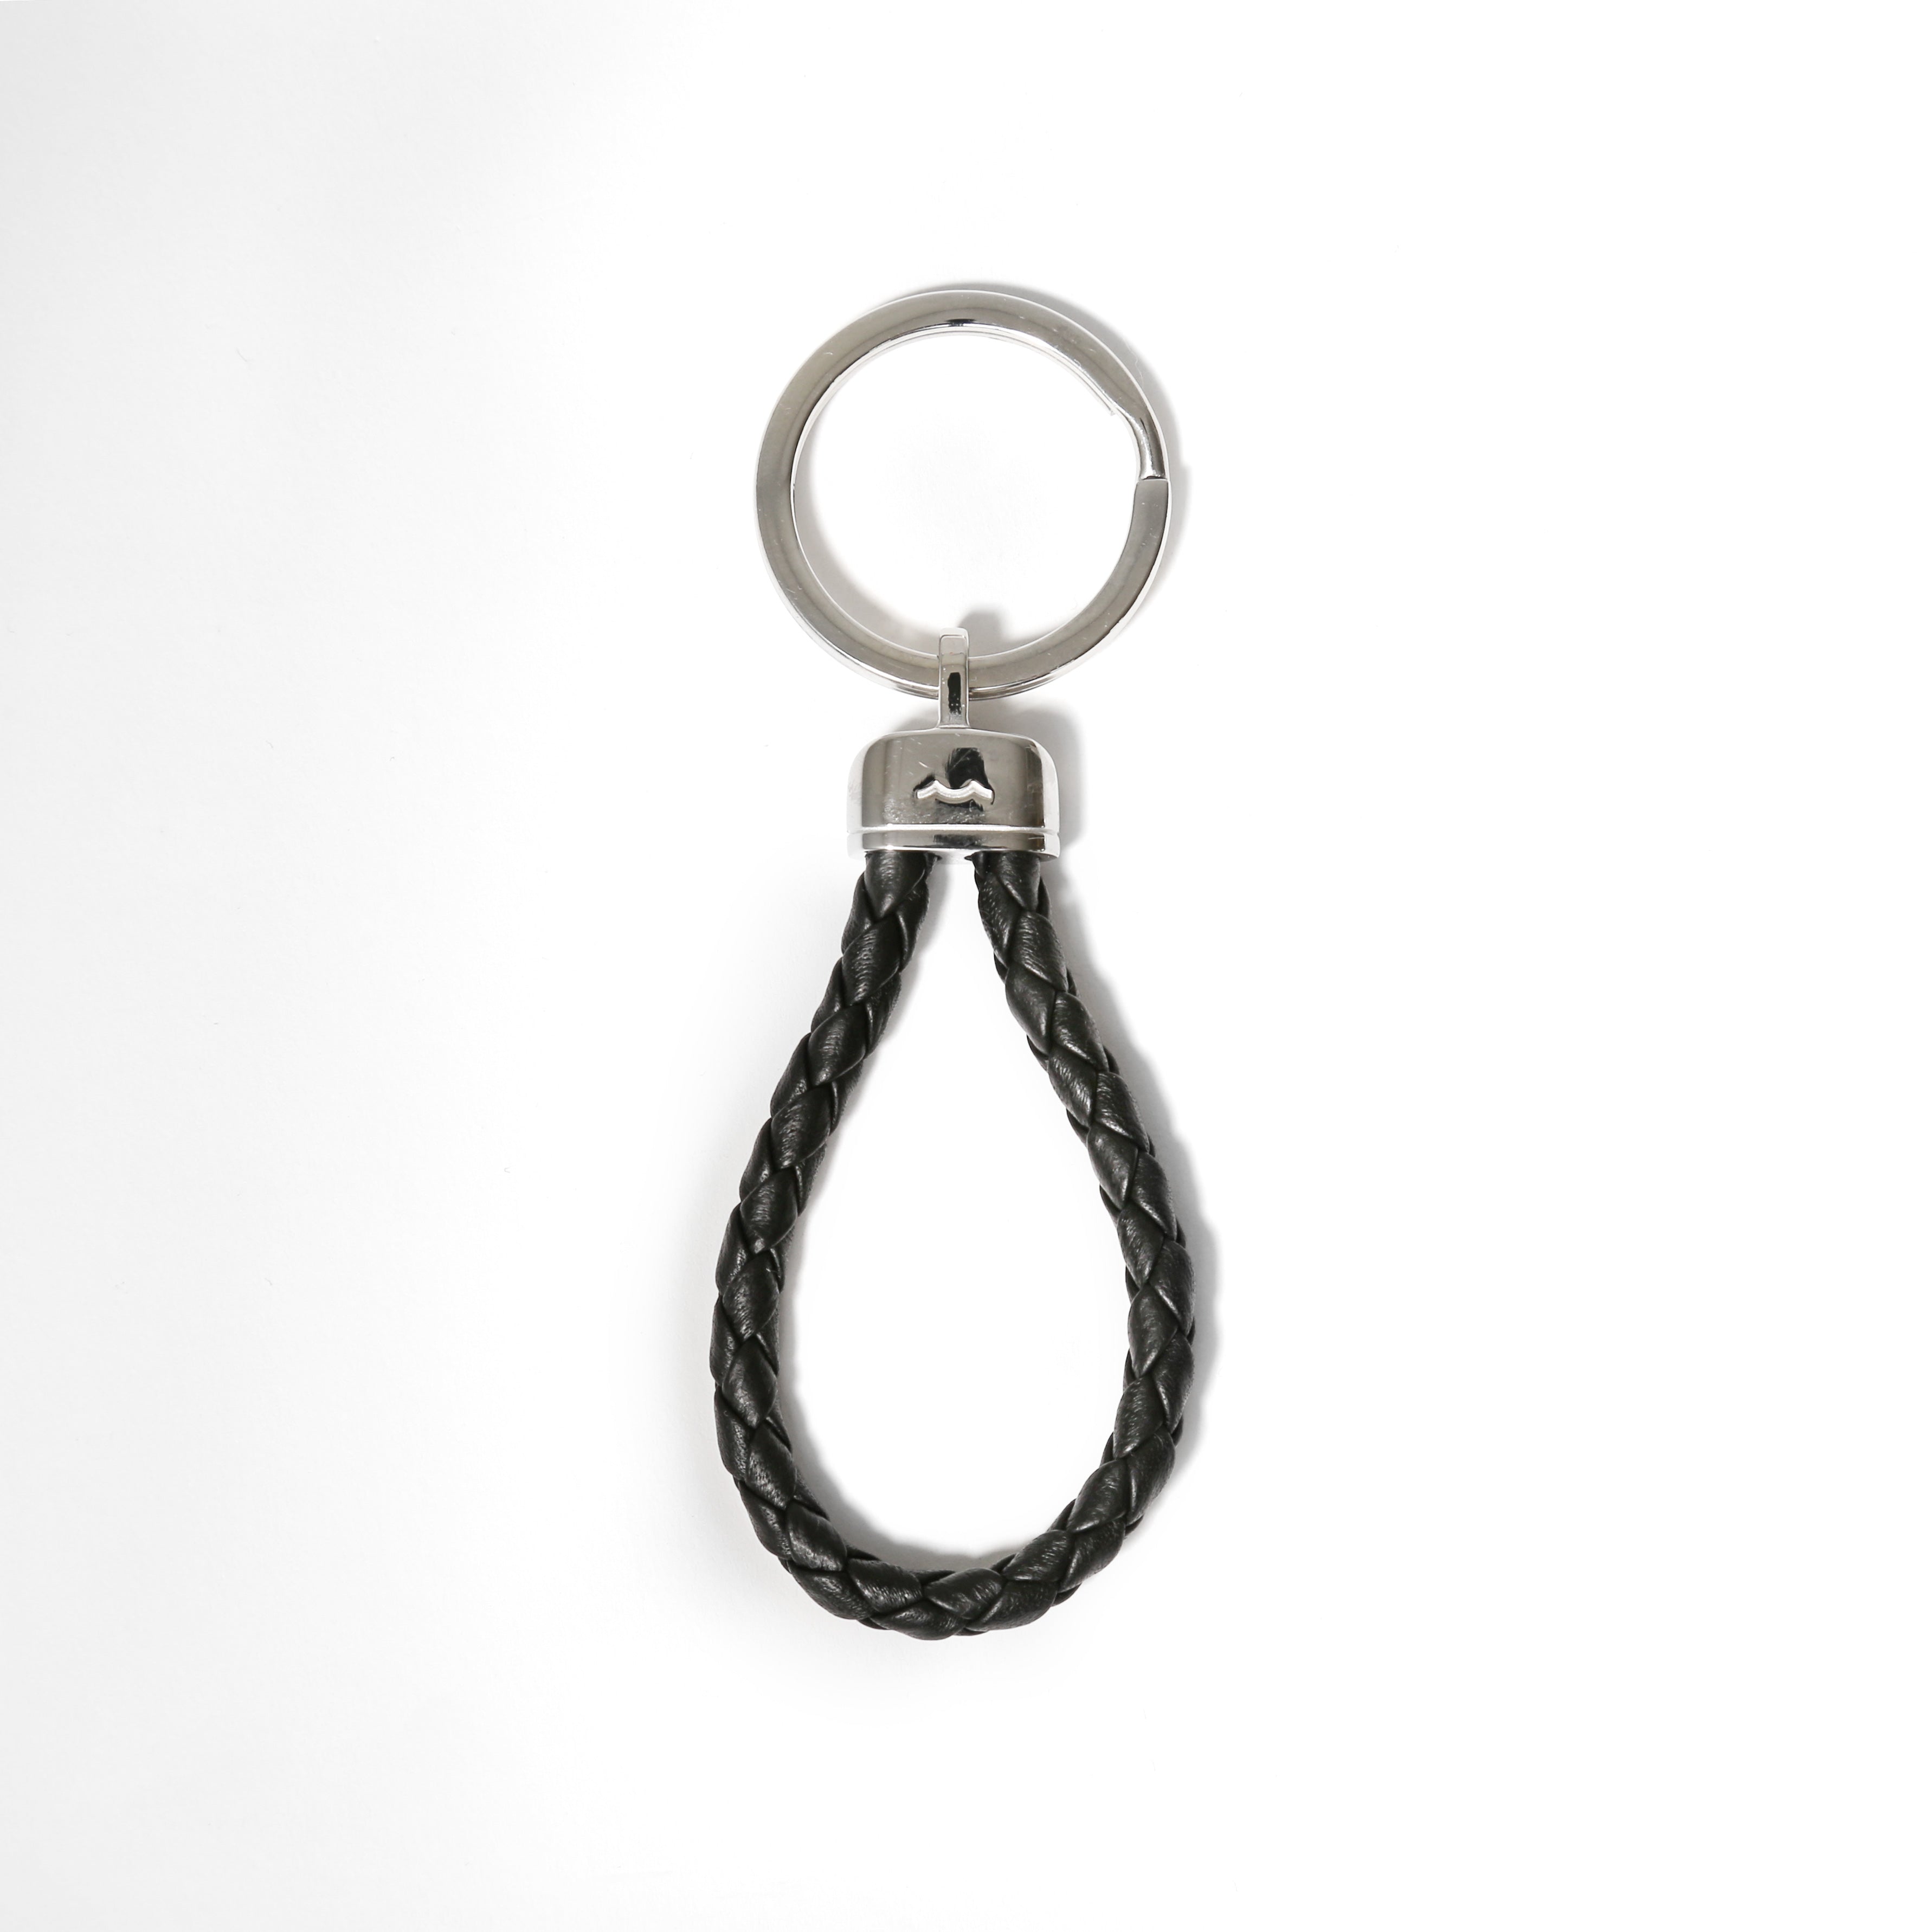 Pete's Point Keychain in Braided Leather – Sailormadeusa